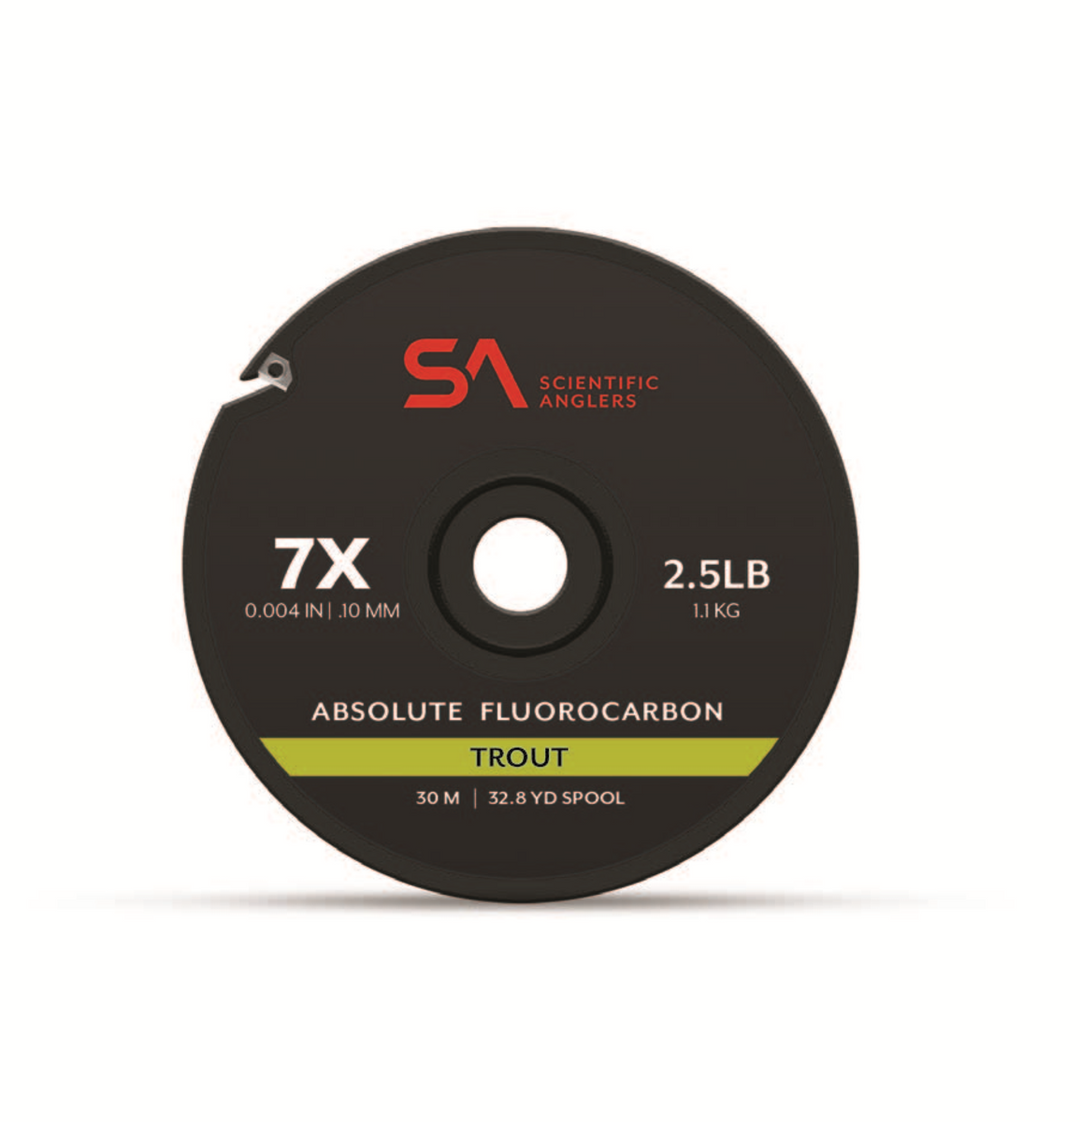 Scientific Anglers Absolute Fluorocarbon Trout Tippet - 30m - 5.5x